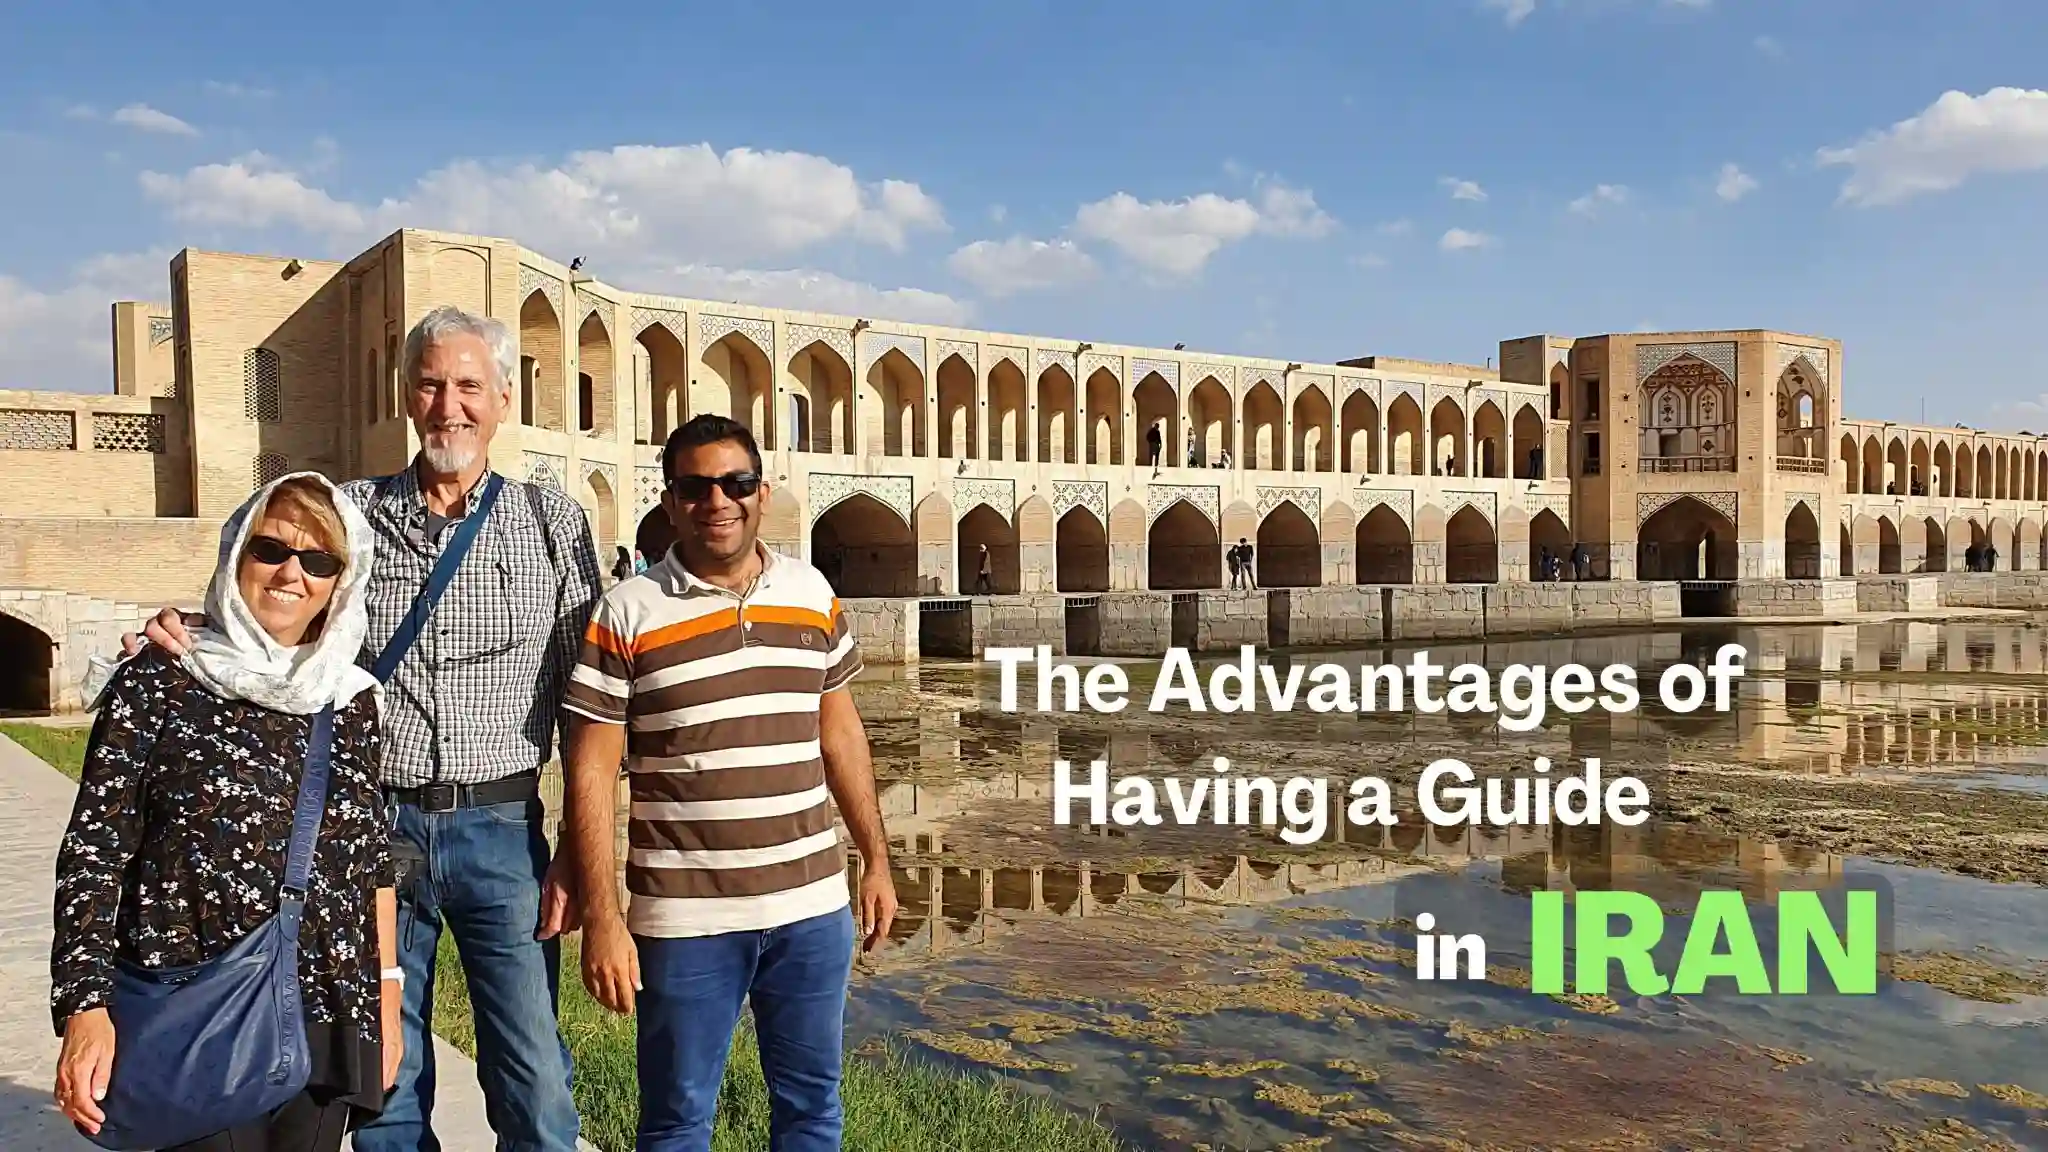 The advantages of having a guide in IRAN